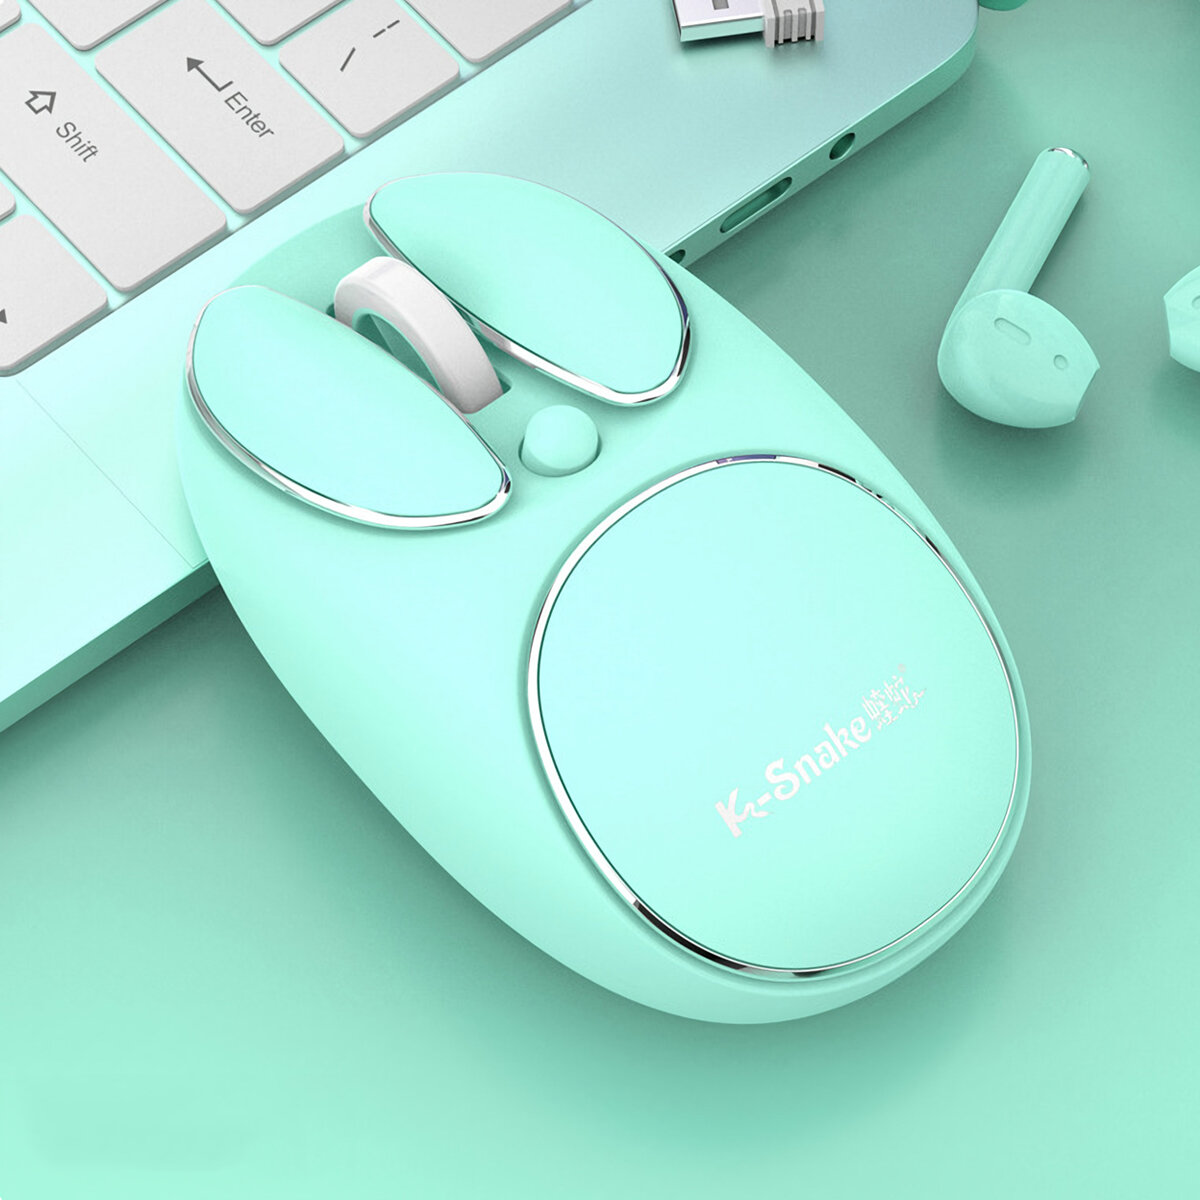 K-Snake W520 2.4G Wireless Mouse Adjustable 800-1600DPI Rechargeable Silent Macaron Mice for Laptop PC COD